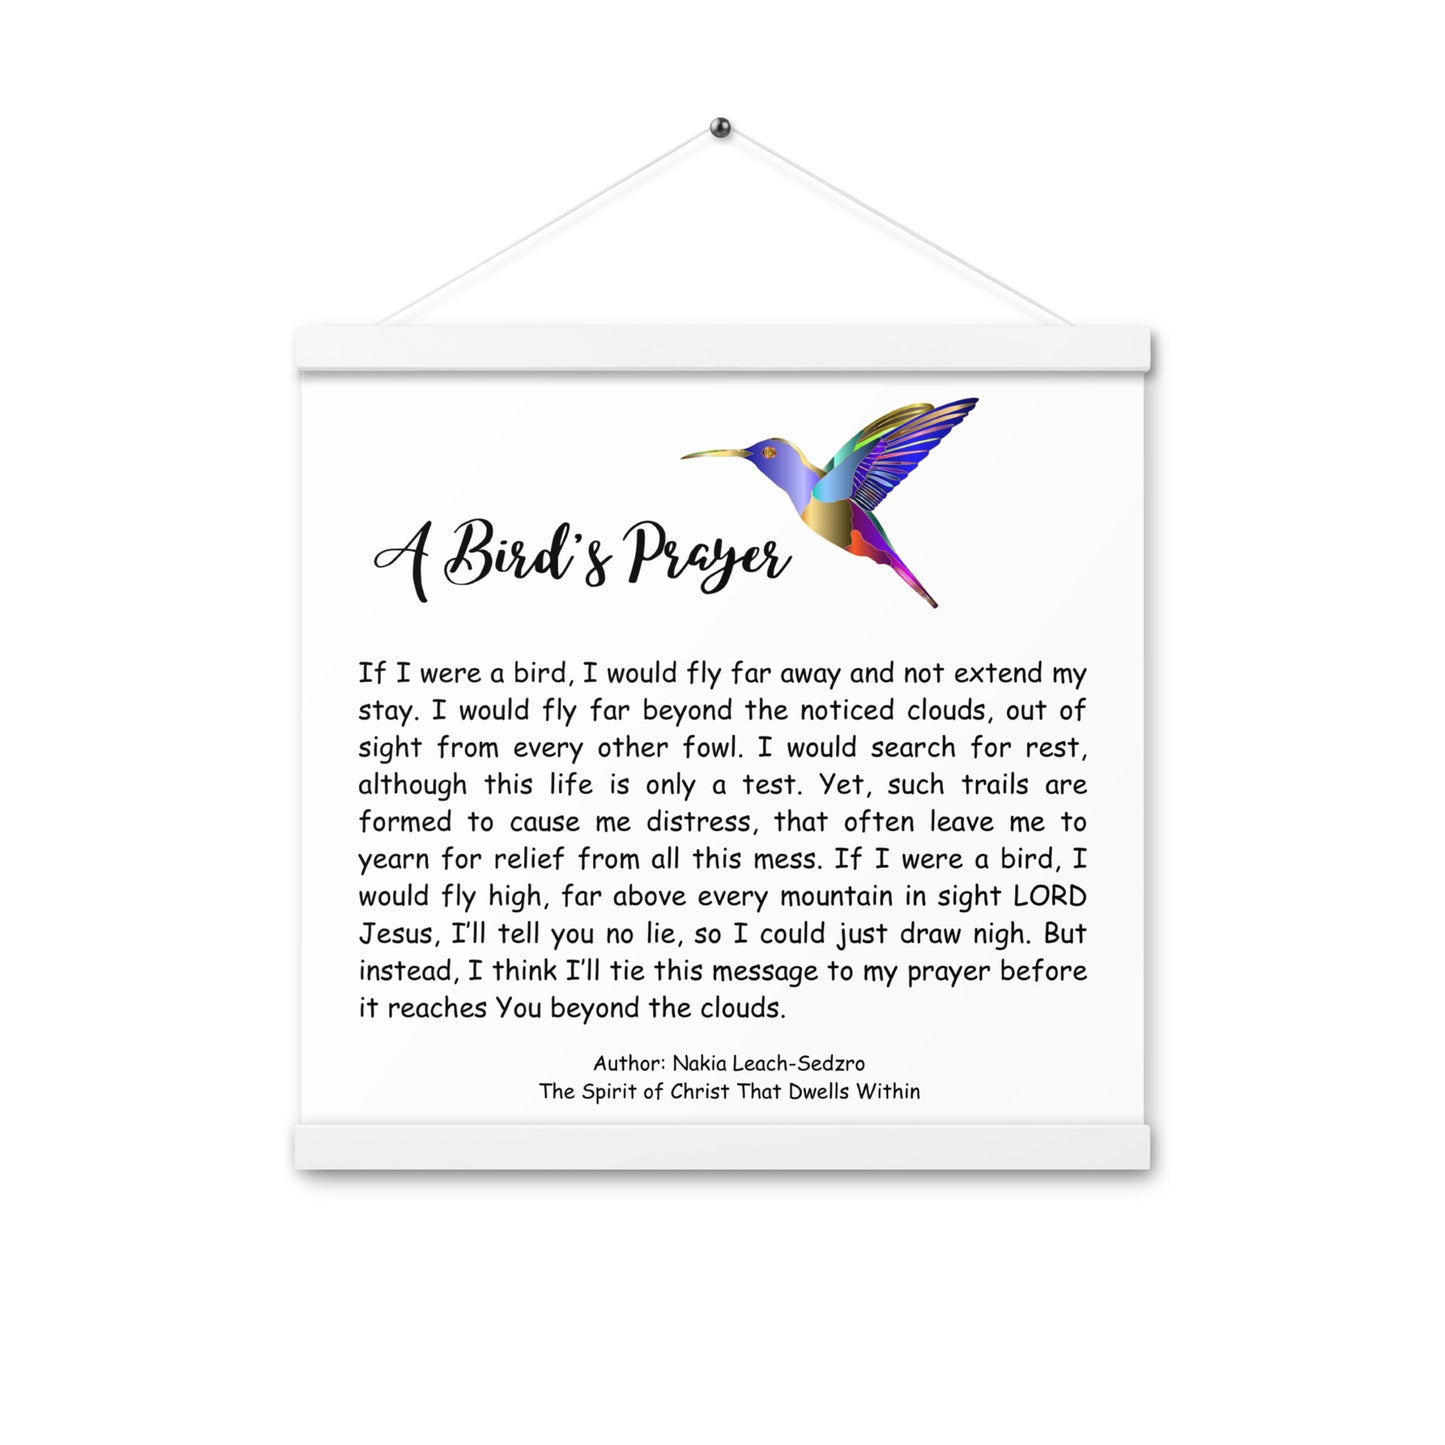 By Faith "A Bird's Prayer" Poem Poster With Hangers